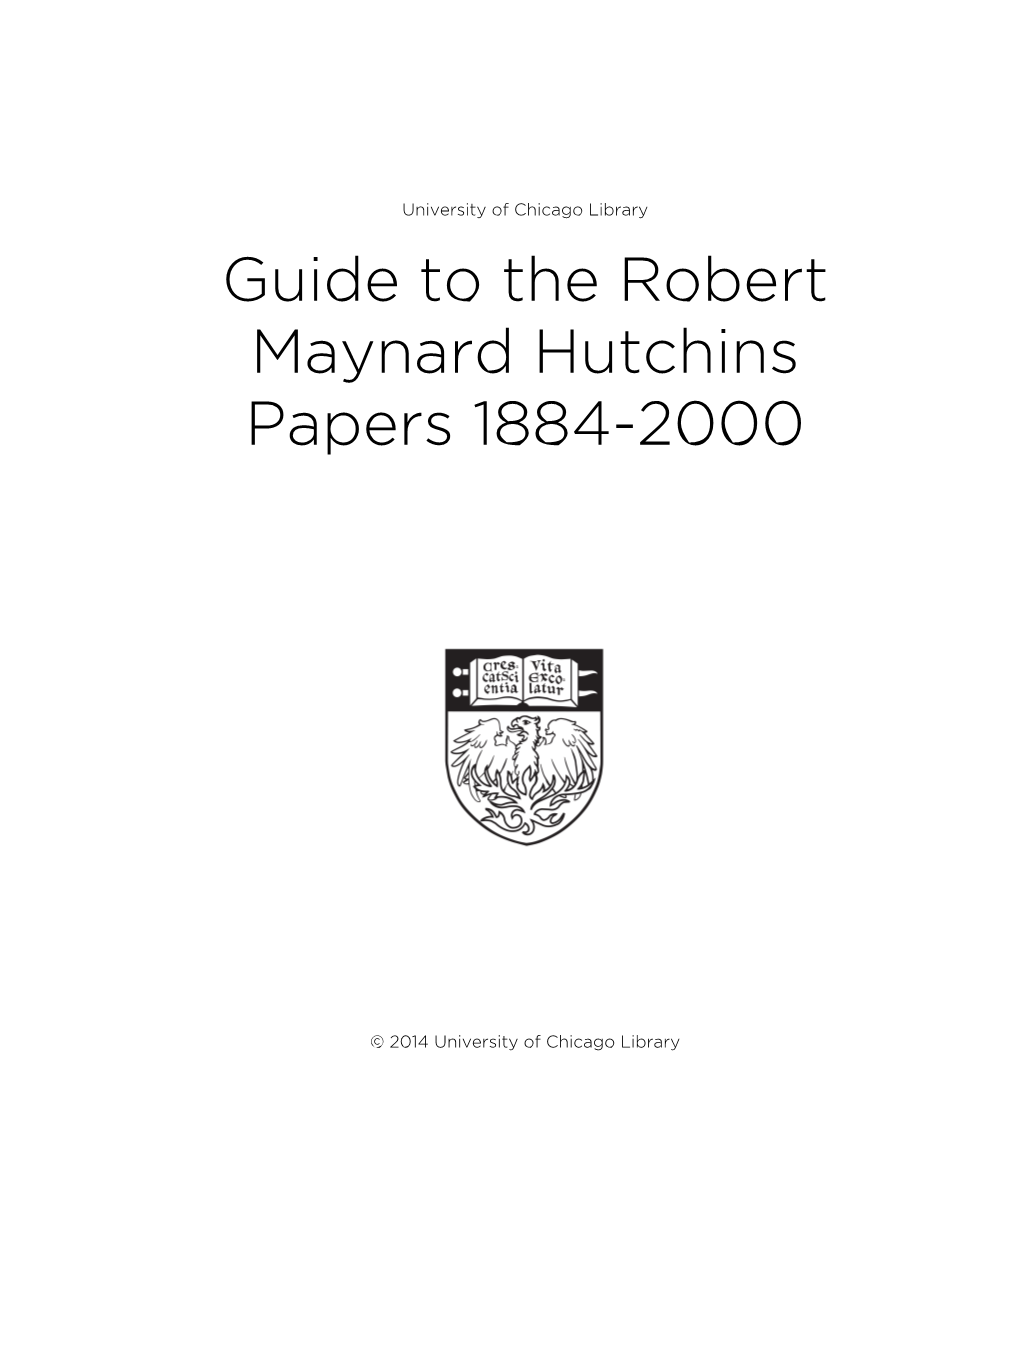 Guide to the Robert Maynard Hutchins Papers 1884-2000